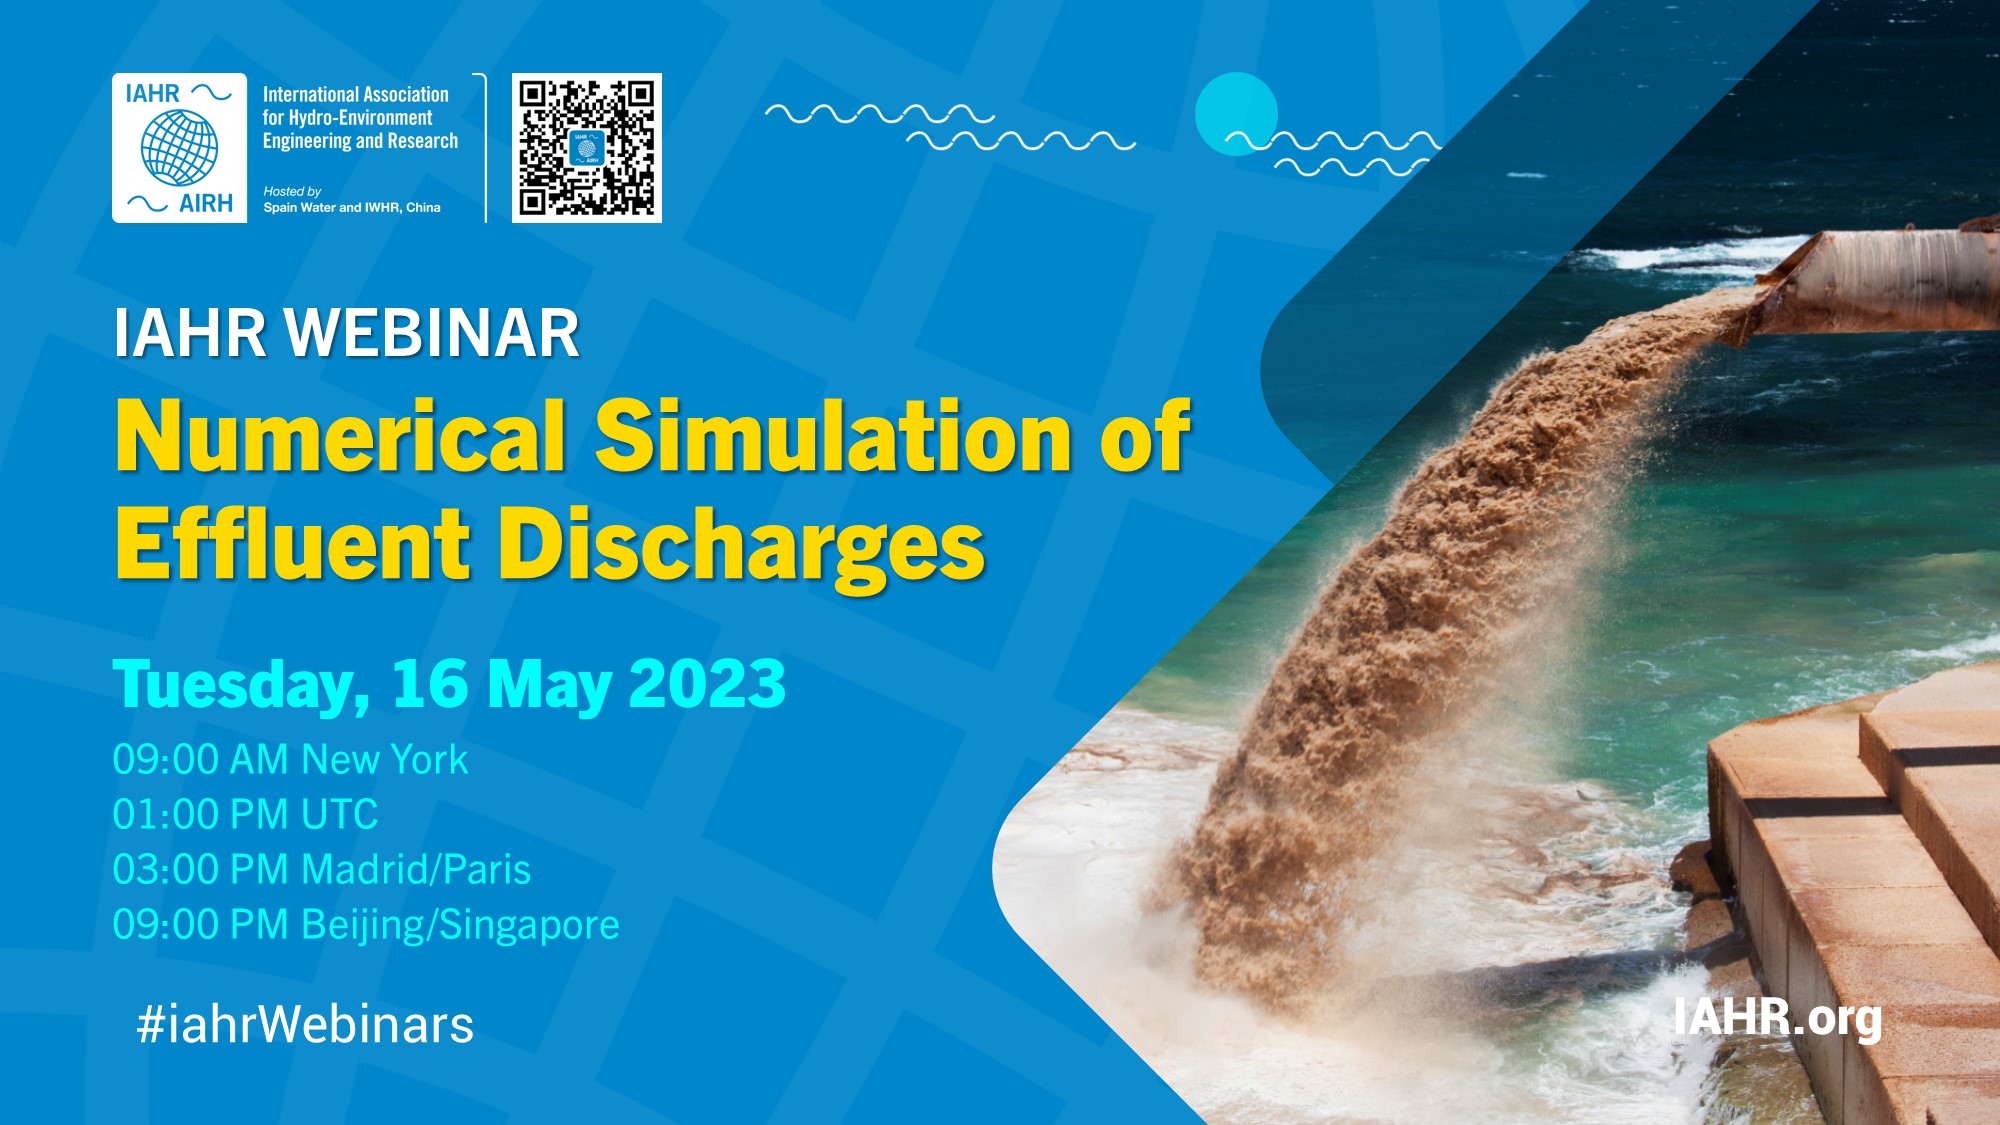 IAHR Webinar on Numerical Simulation of Effluent Discharges